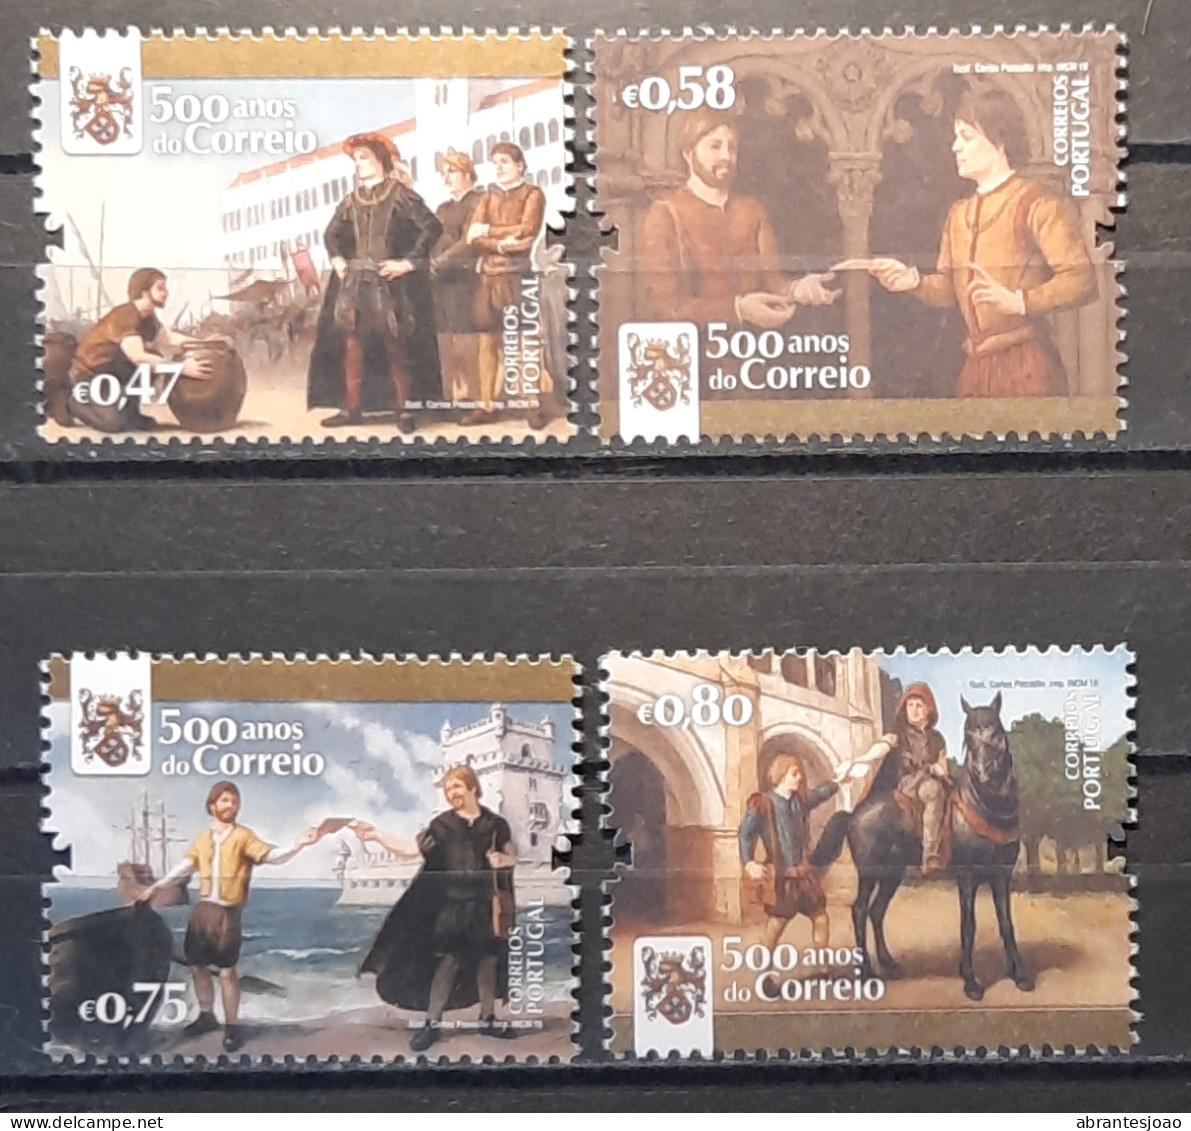 2016 - Portugal - MNH - 500 Years Of Mail In Portugal - 1st Group - 4 Stamps + Souvenir Sheet Of 1 Stamp - Ongebruikt